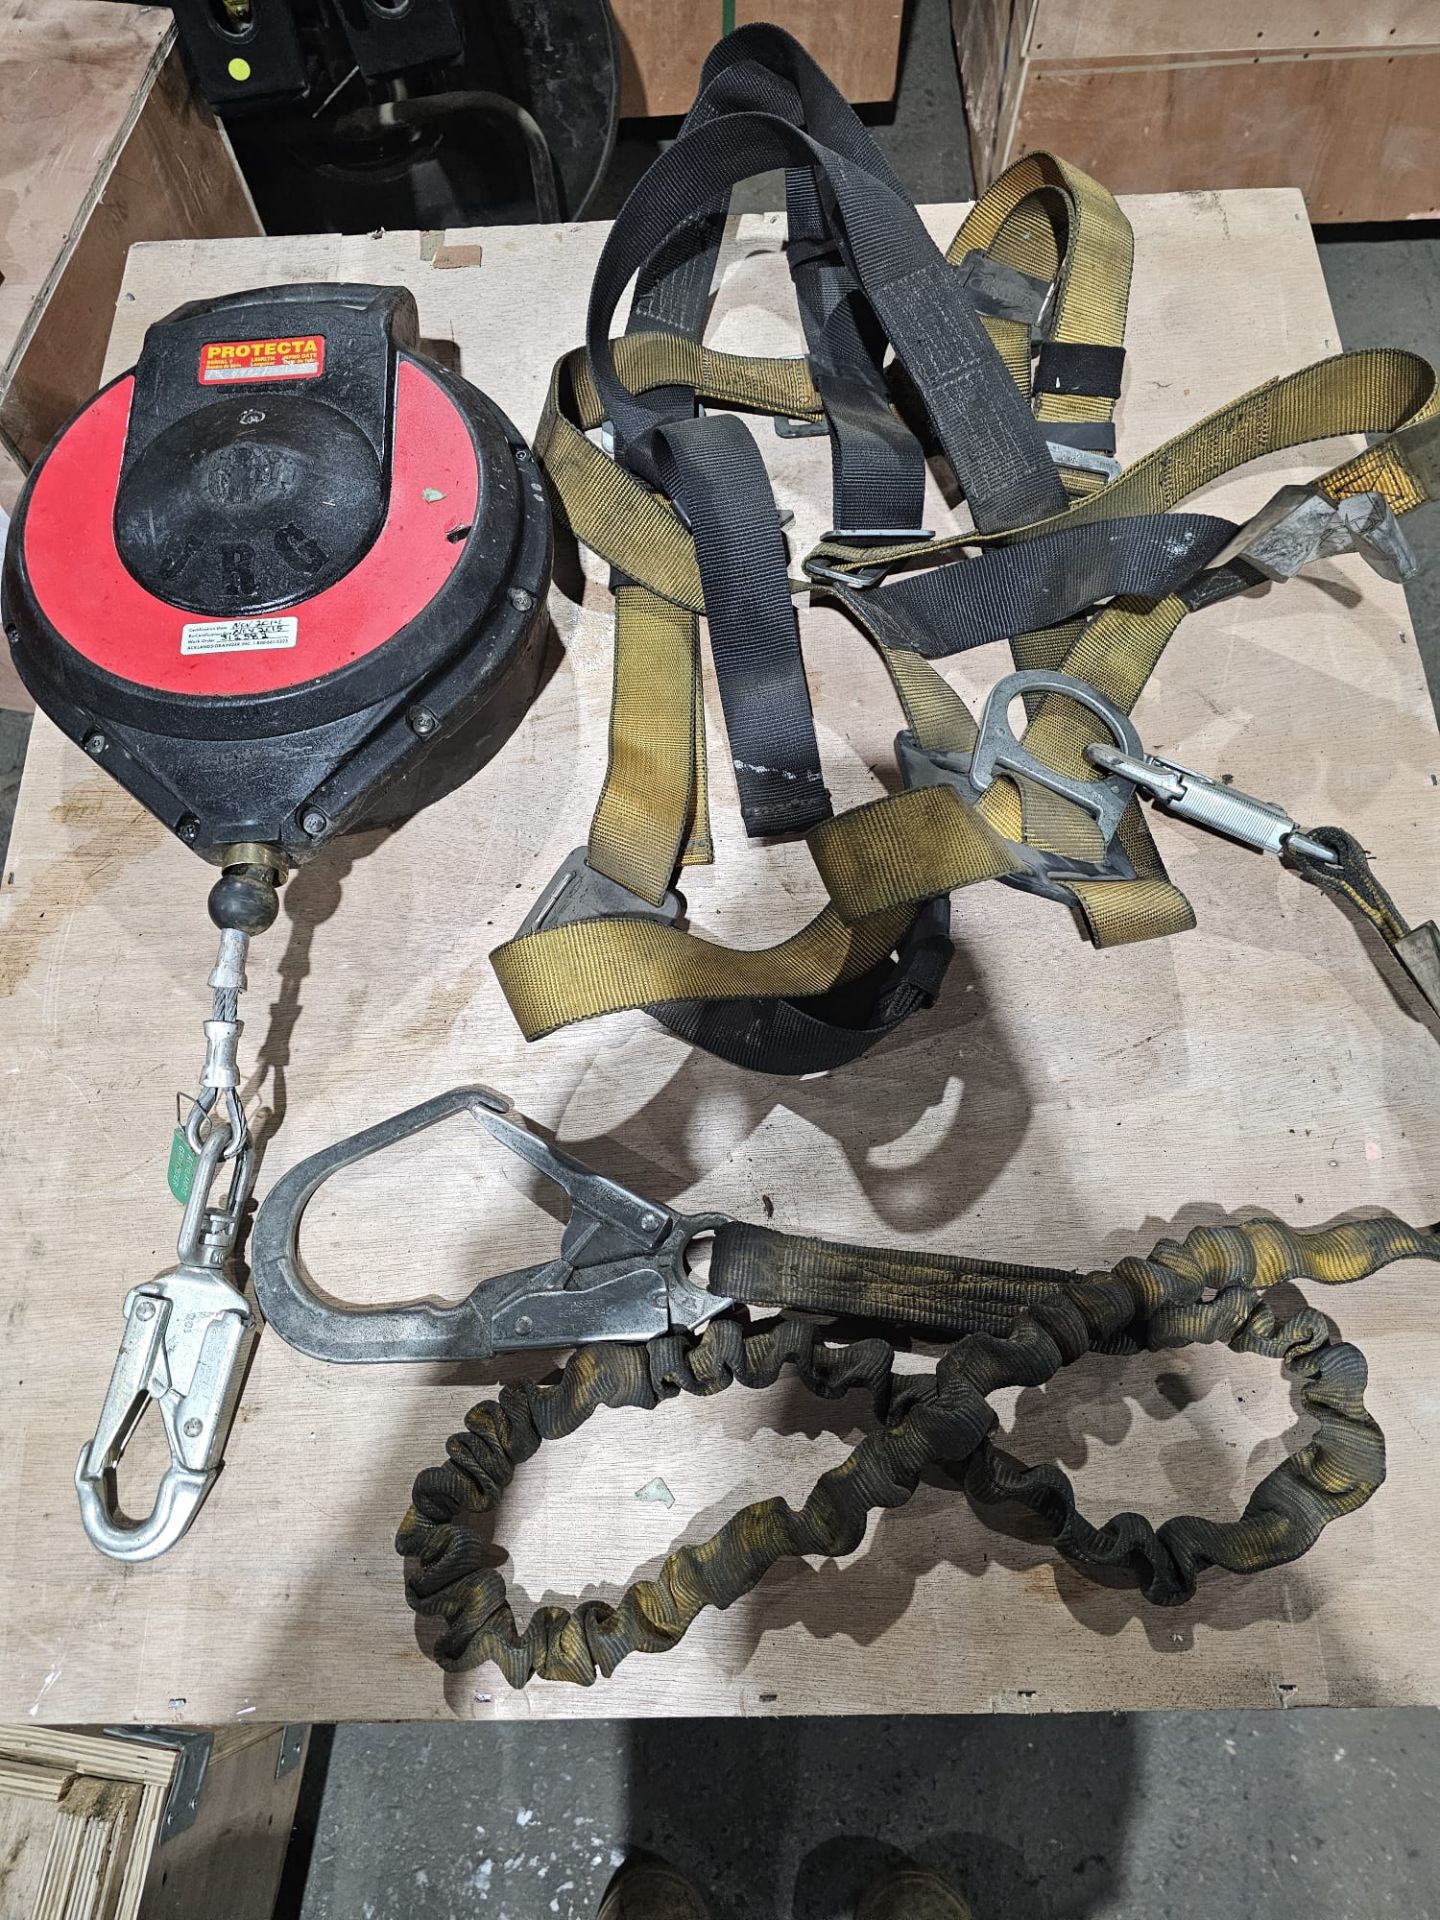 1 lot Protecta Fall arrest system with harness and lanyard